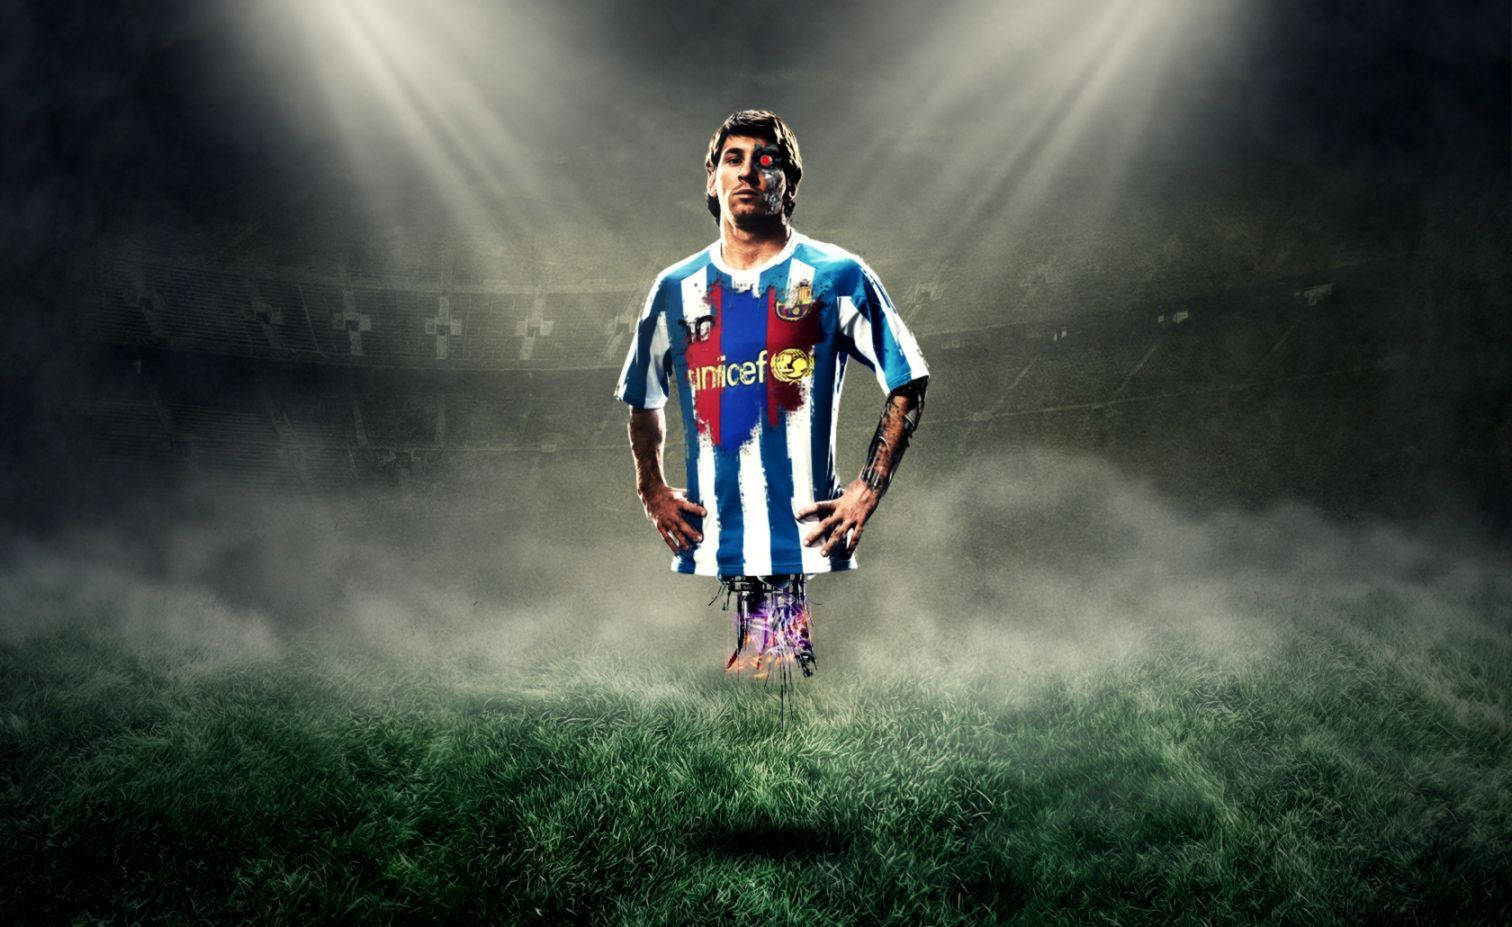 Cool Soccer Player Cyborg Messi Background